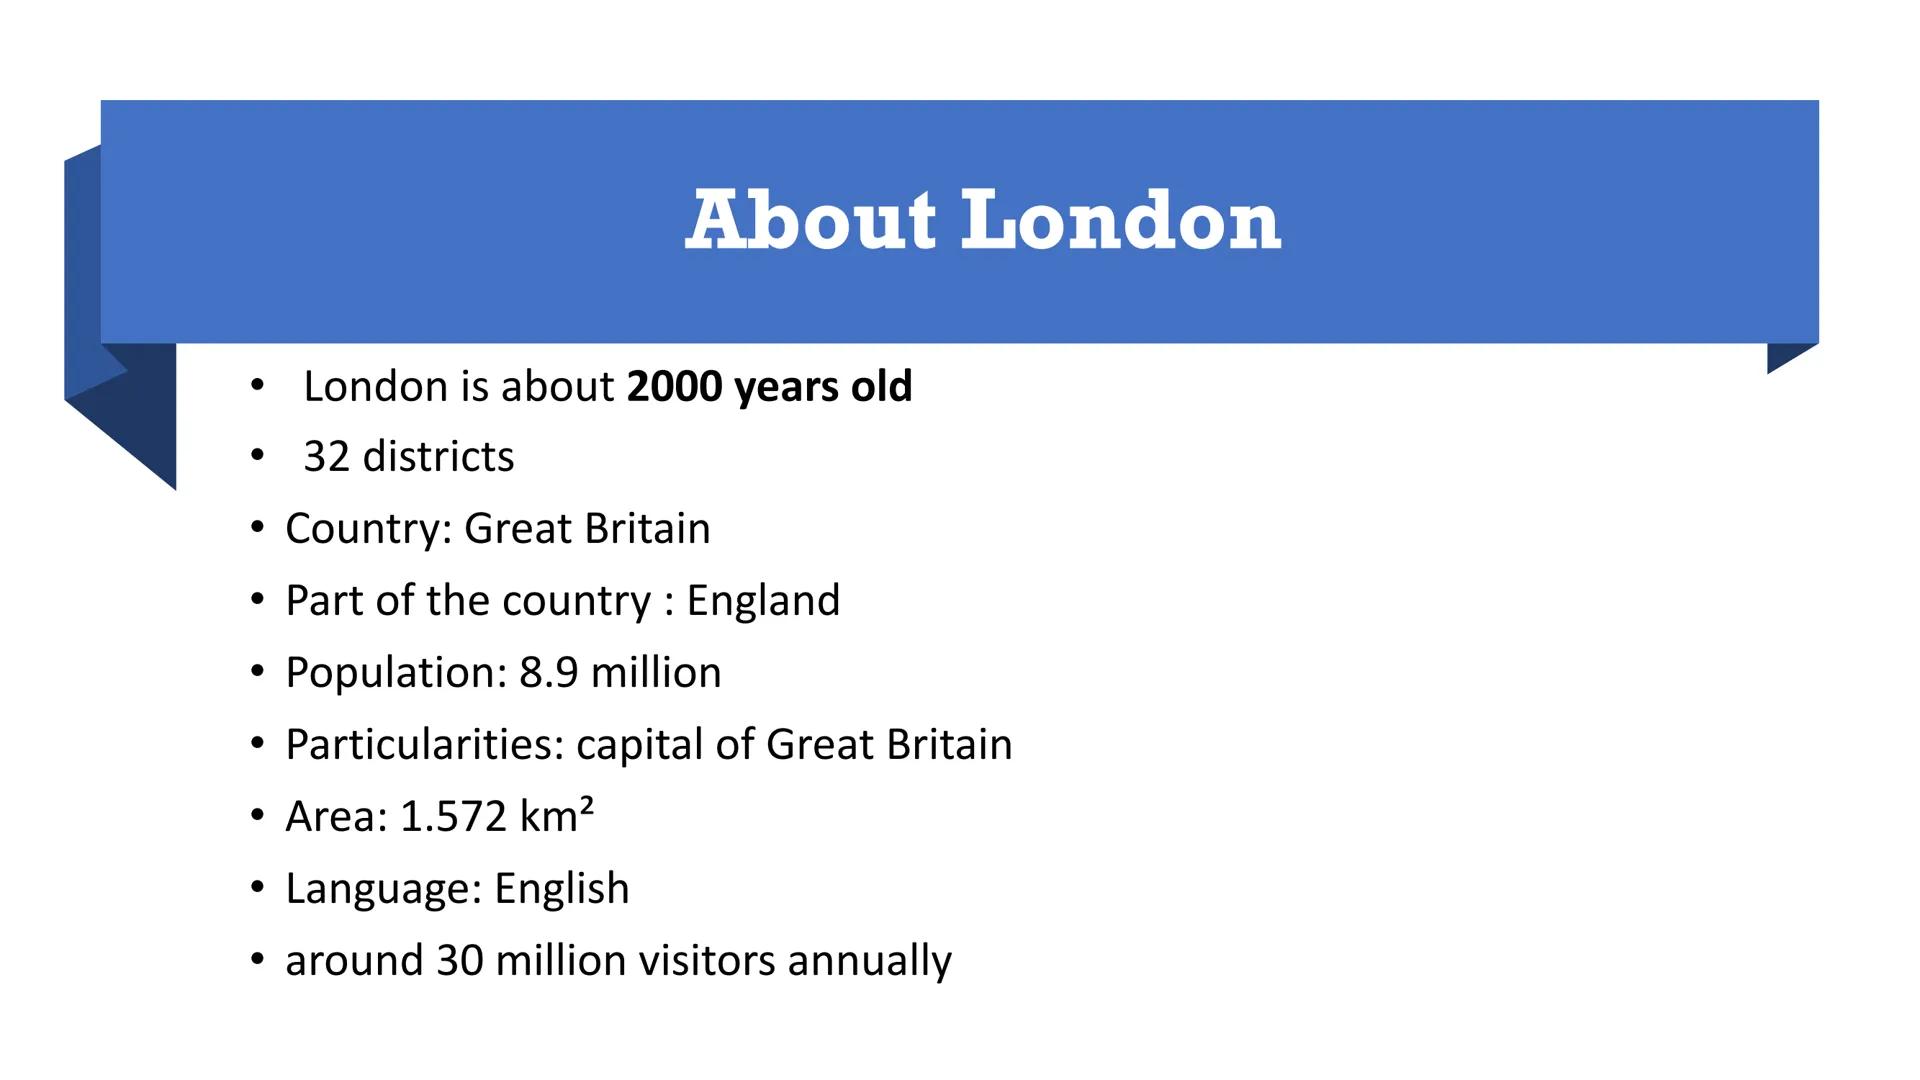 Englisch
Facts:
London is about 2000 years old
32 districts
Country: Great Britain
Part of the country: England
Population: 8.9 million
0.00